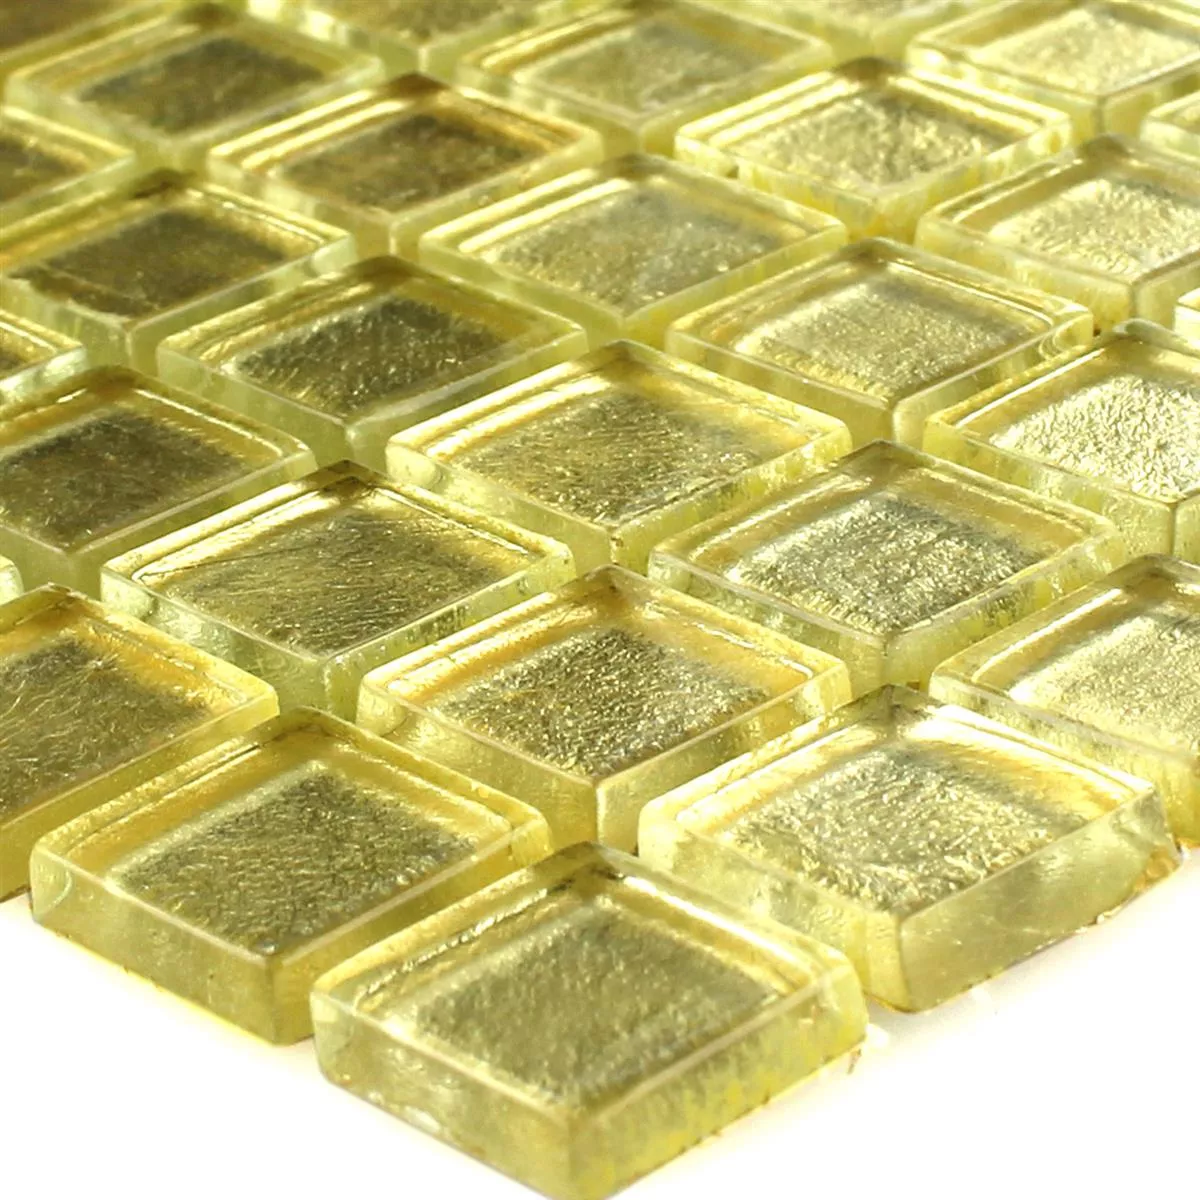 Mosaic Tiles Glass Capone Gold